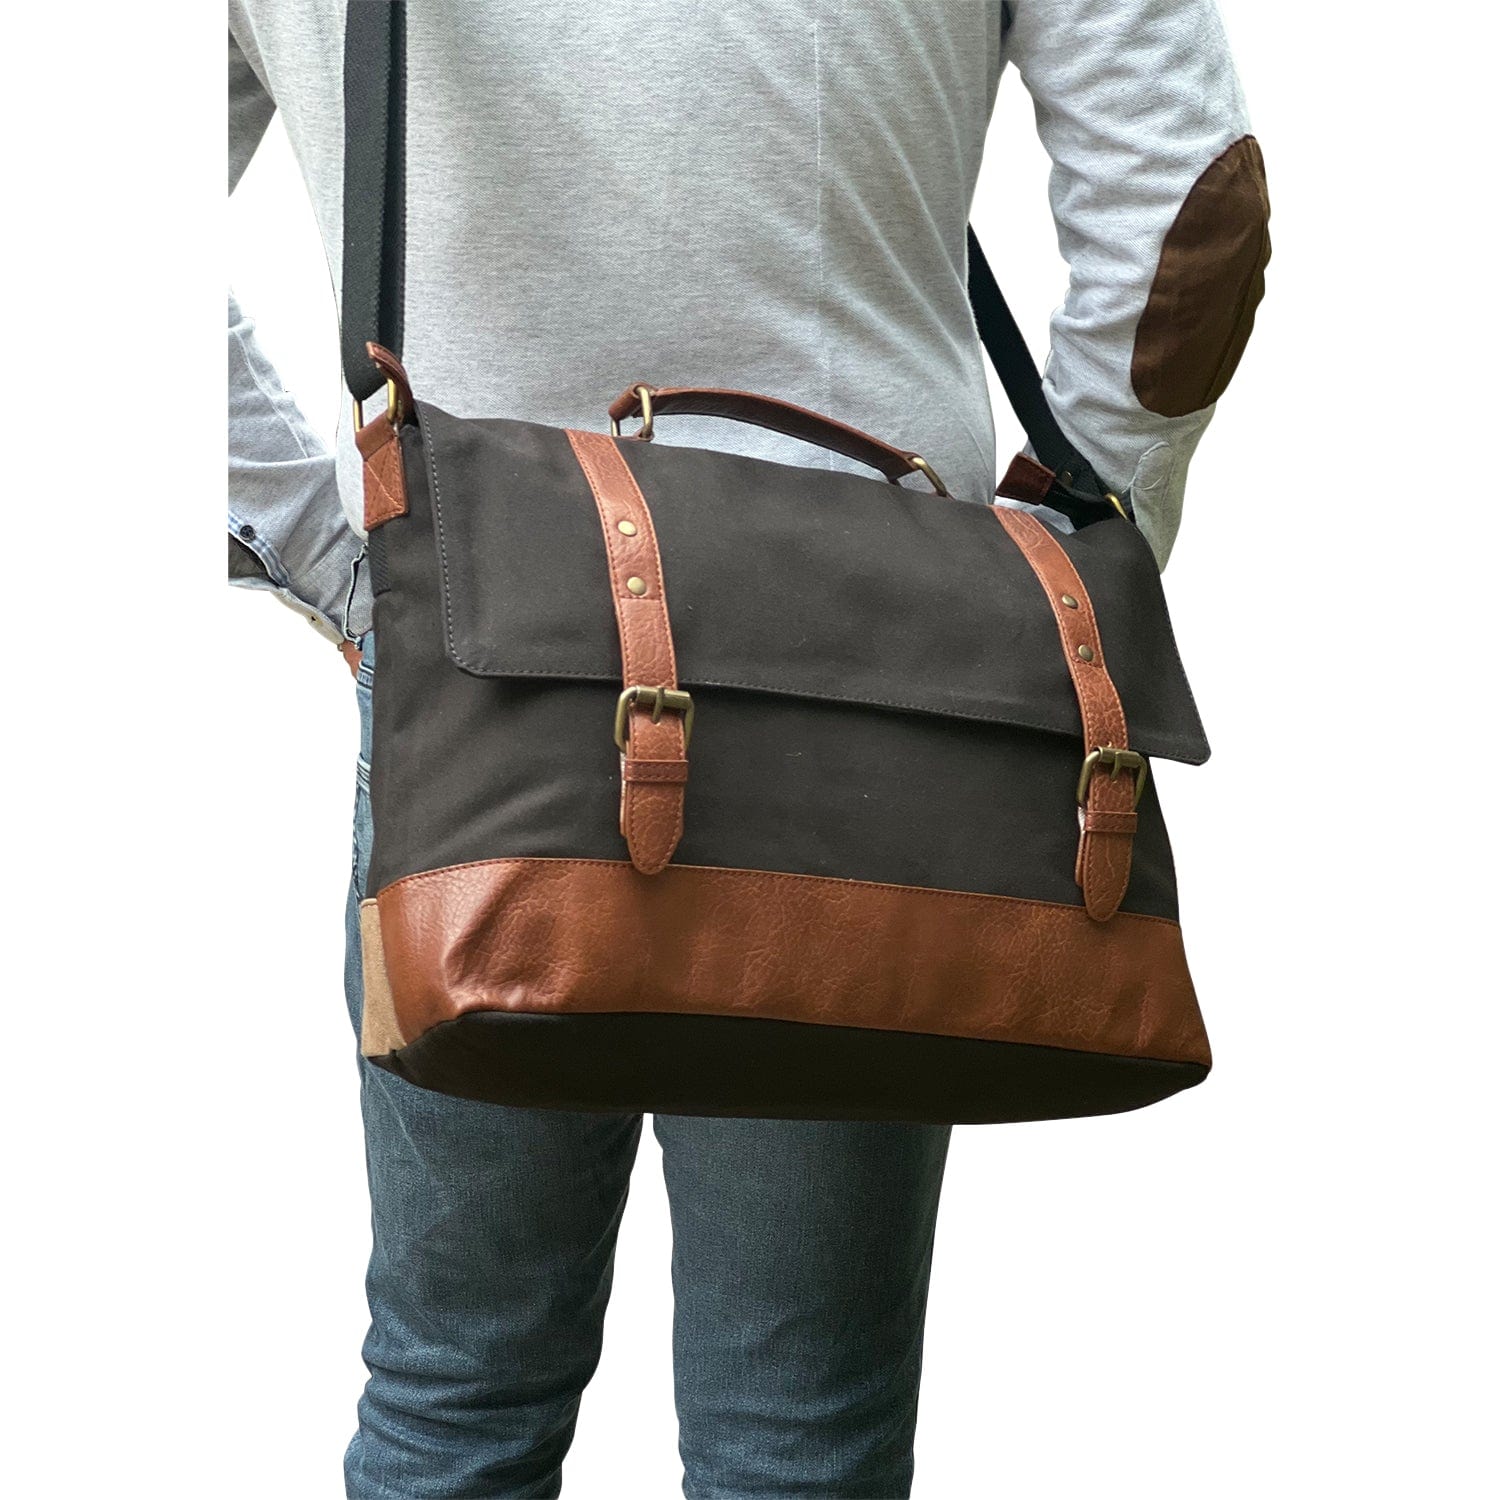 Mona-B Bag Mona B Upcycled Canvas Messenger Crossbody Laptop Bag for Upto 14" Laptop/Mac Book/Tablet with Stylish Design for Men and Women: Parker